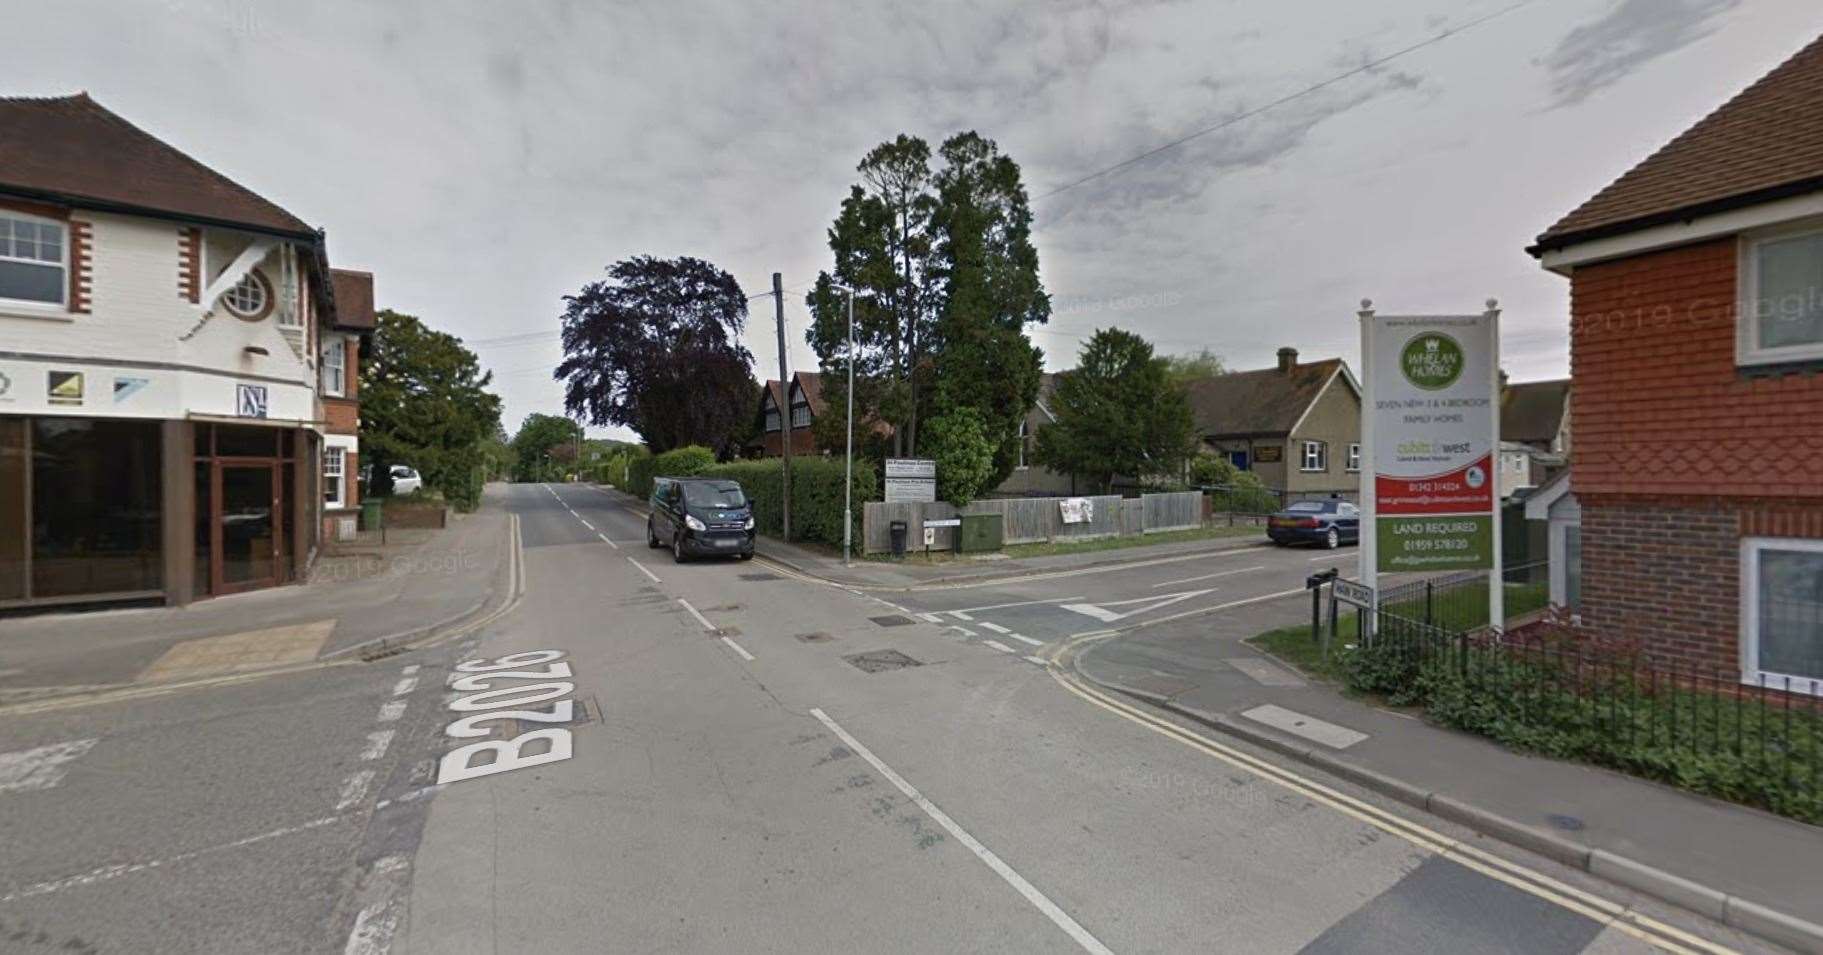 The incident happened on Main Road's junction with Hillcrest Road in Edenbridge. Picture: Google Street View